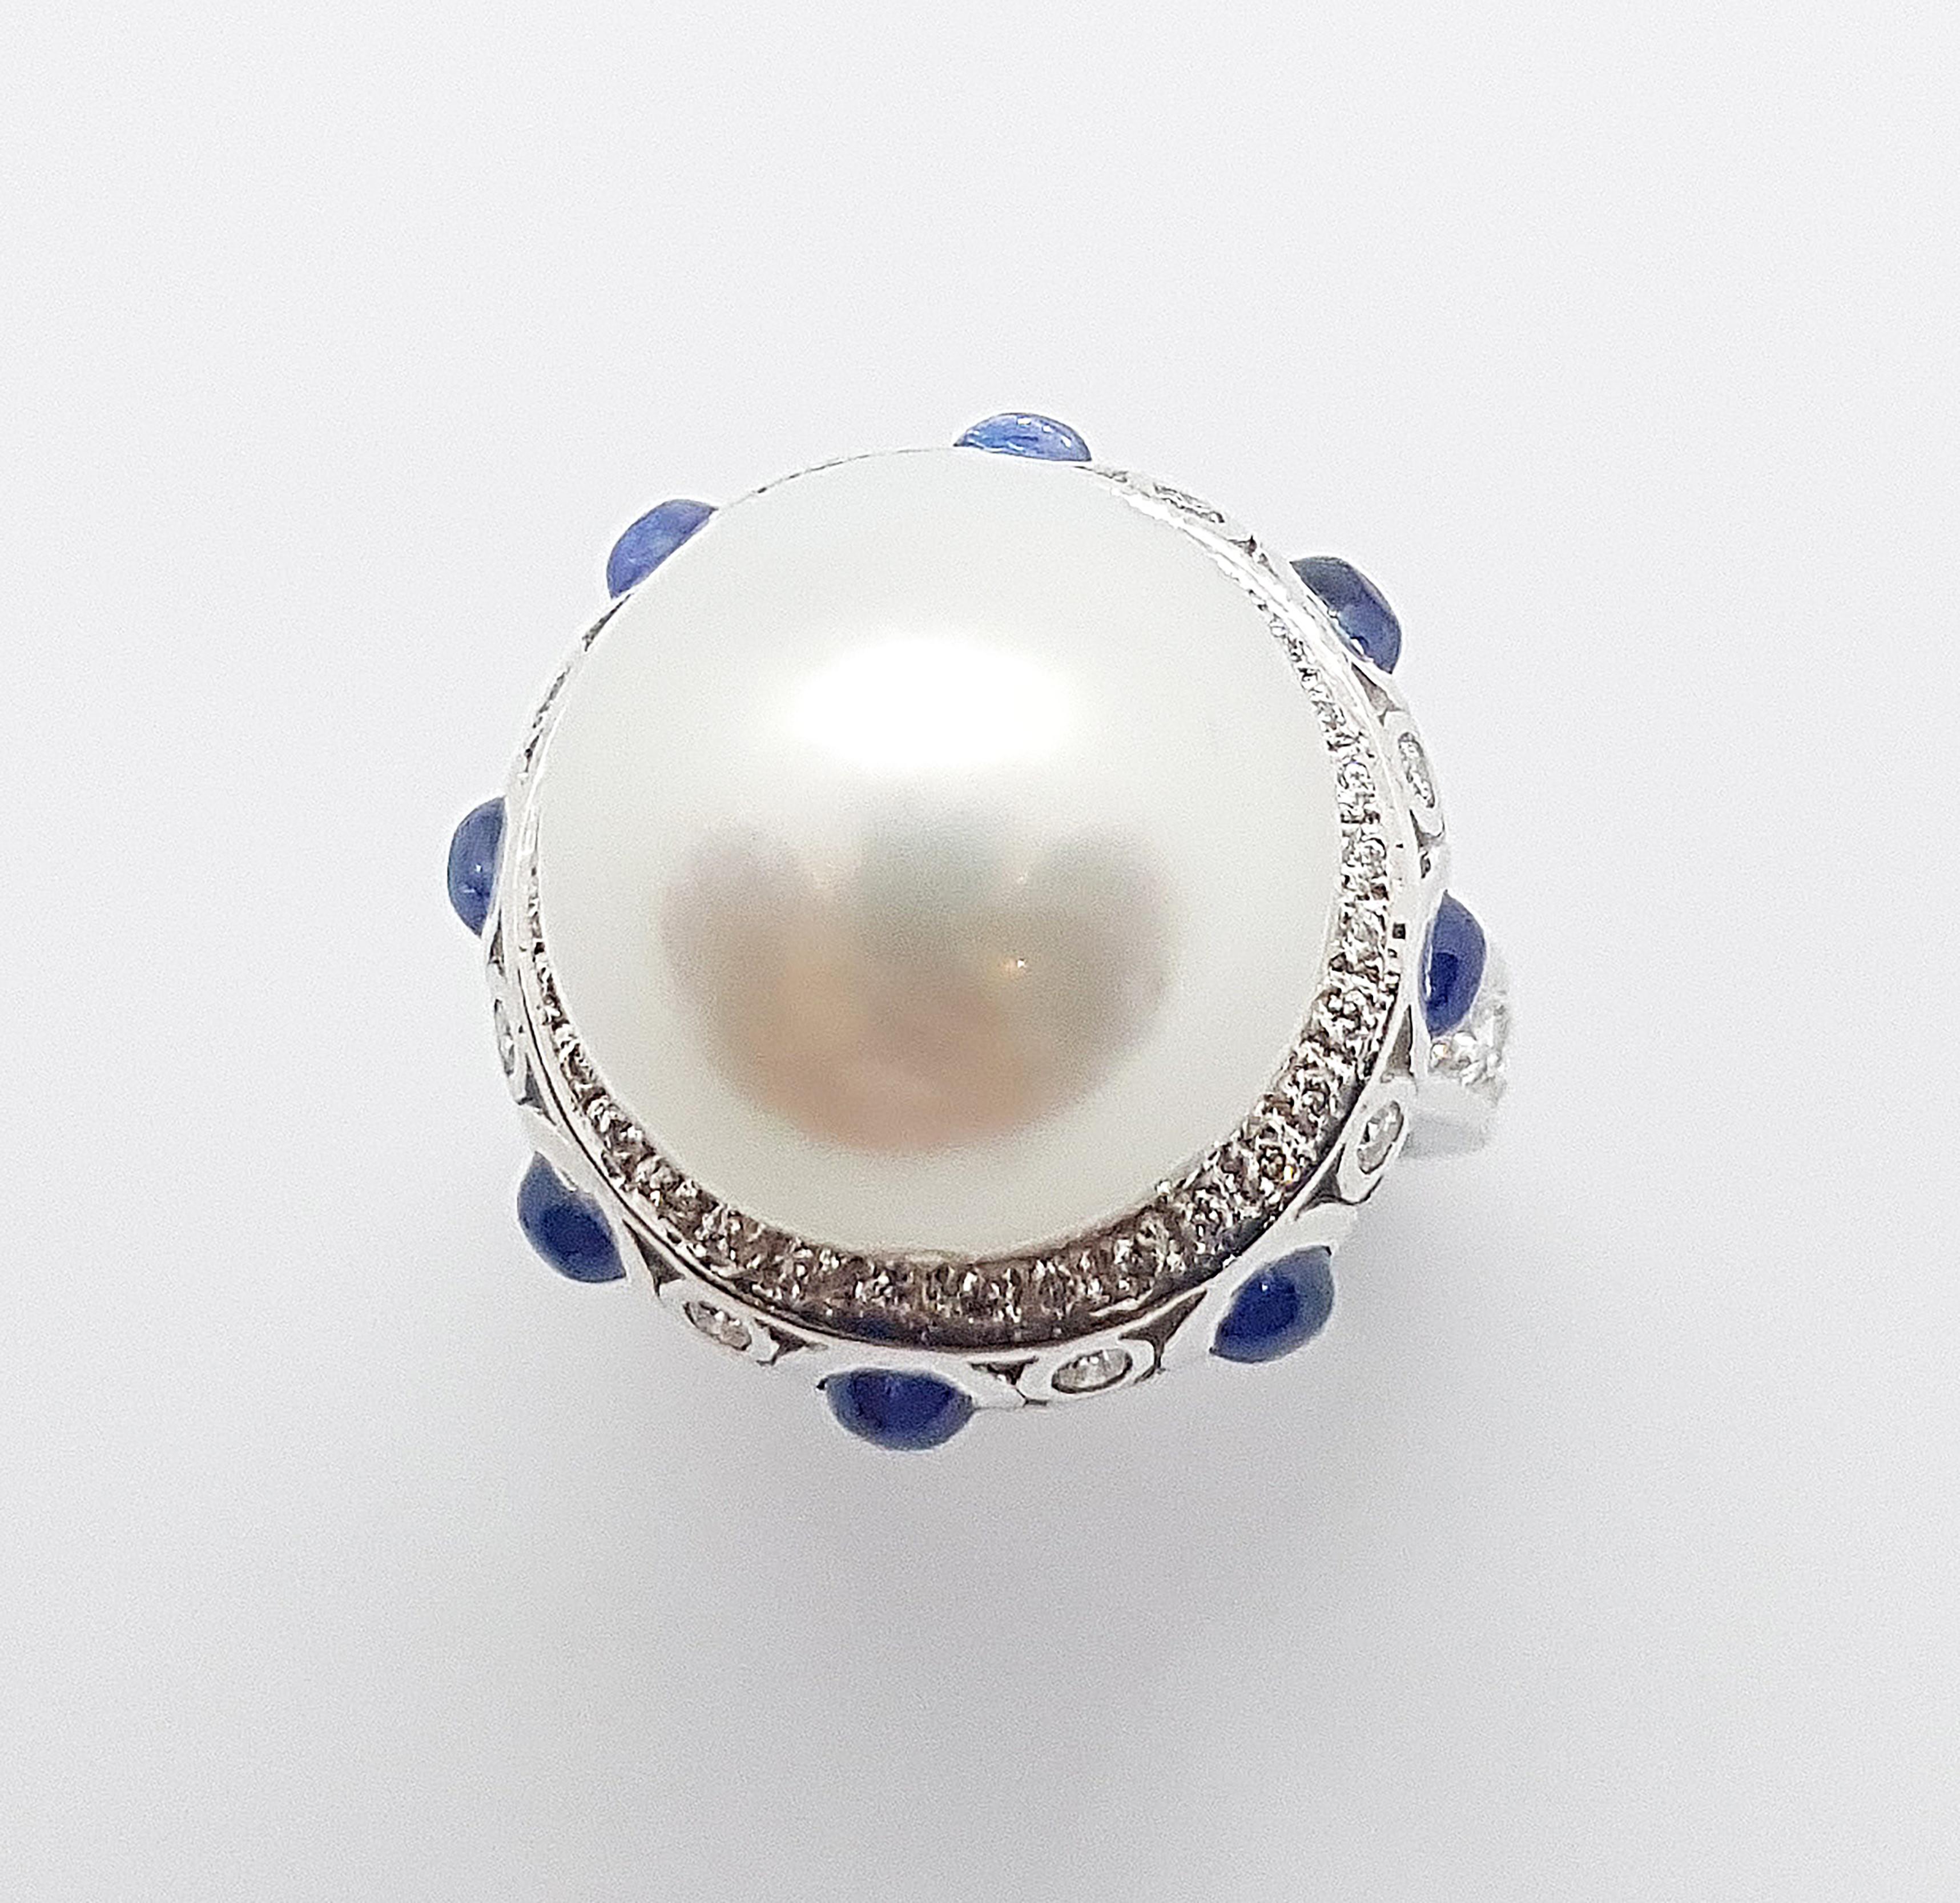 South Sea Pearl With Cabochon Blue Sapphire 1.68 carats and Diamond 0.85 carat Ring set in 18 Karat White Gold Settings

Width:  2.0 cm 
Length: 2.0 cm
Ring Size: 54
Total Weight: 14.01 grams

